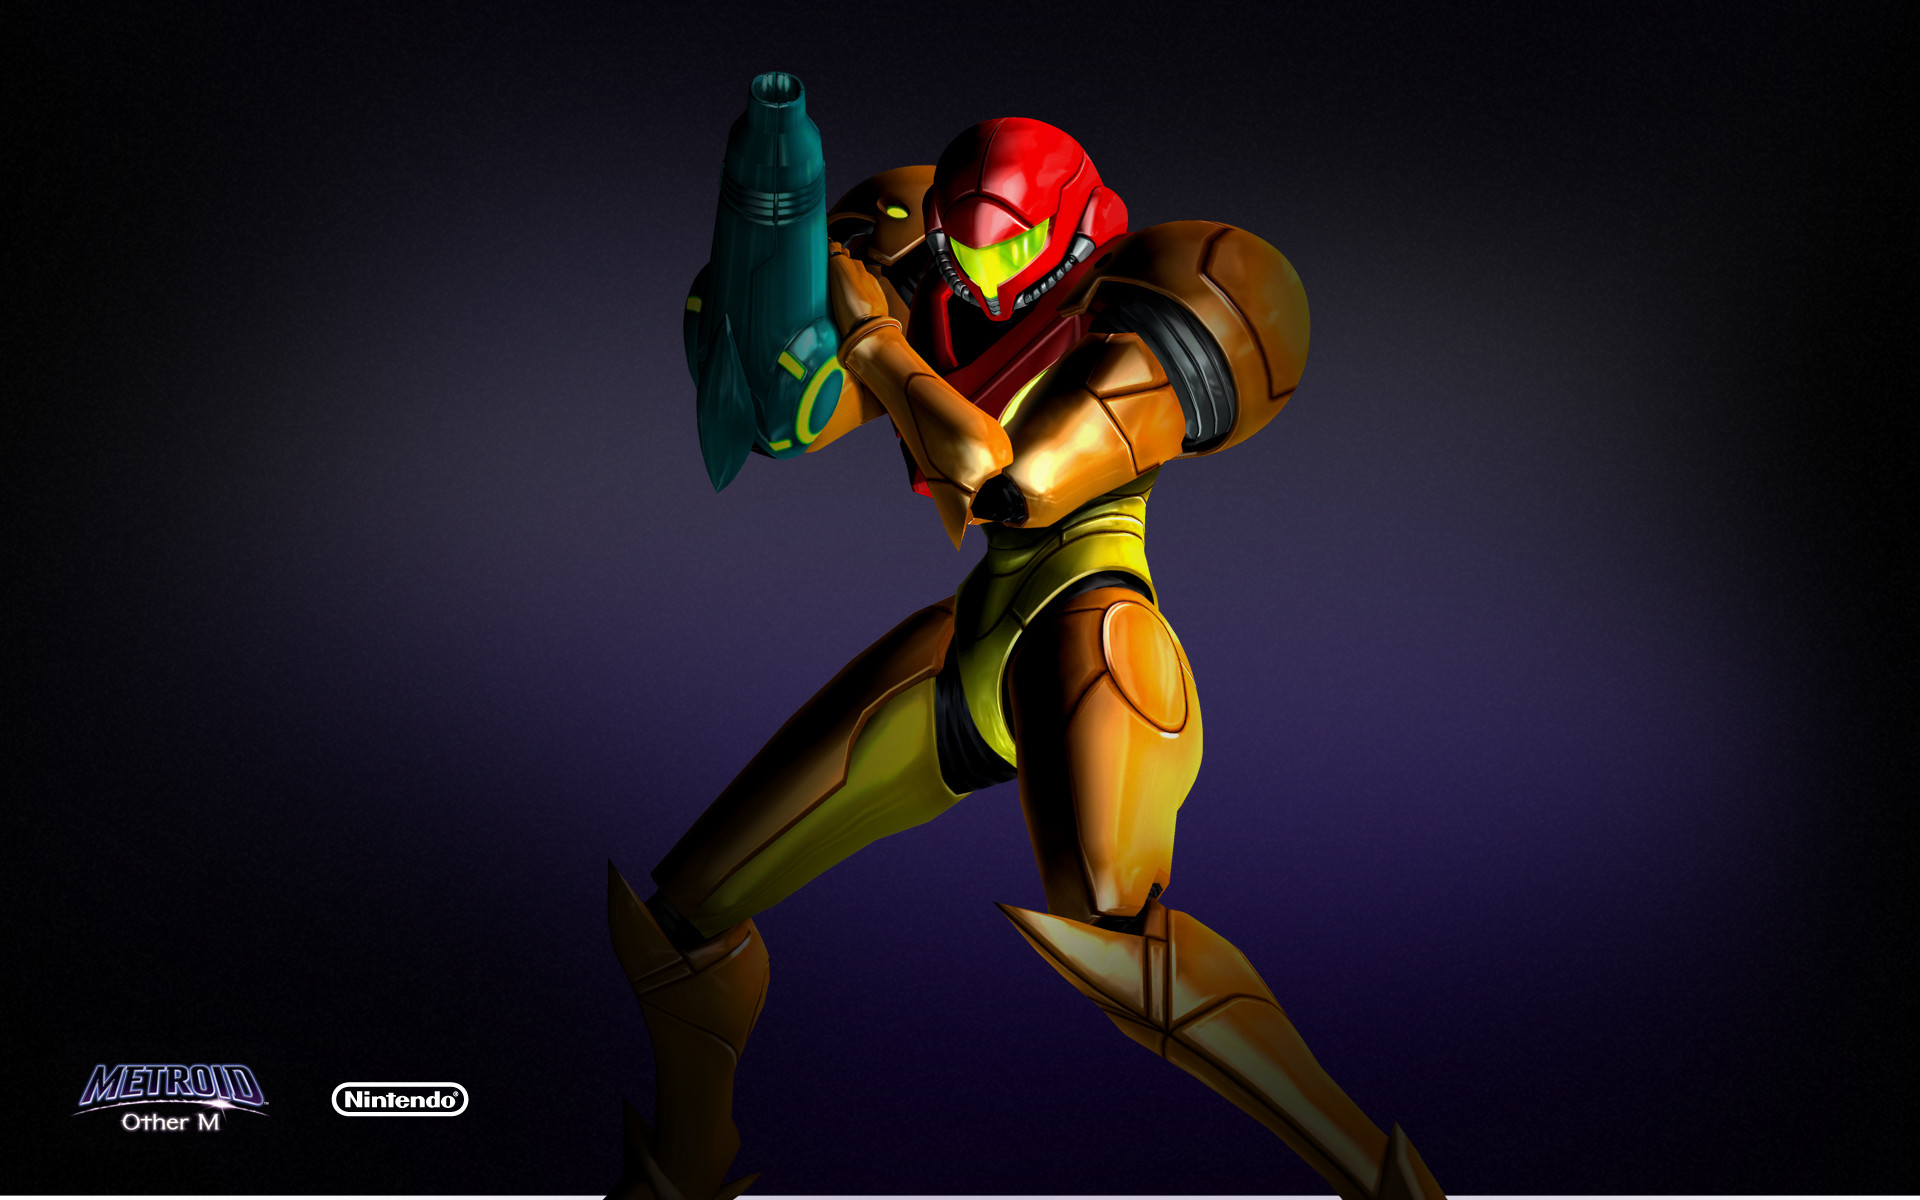 1920x1200 Metroid: Other M wallpaper 5